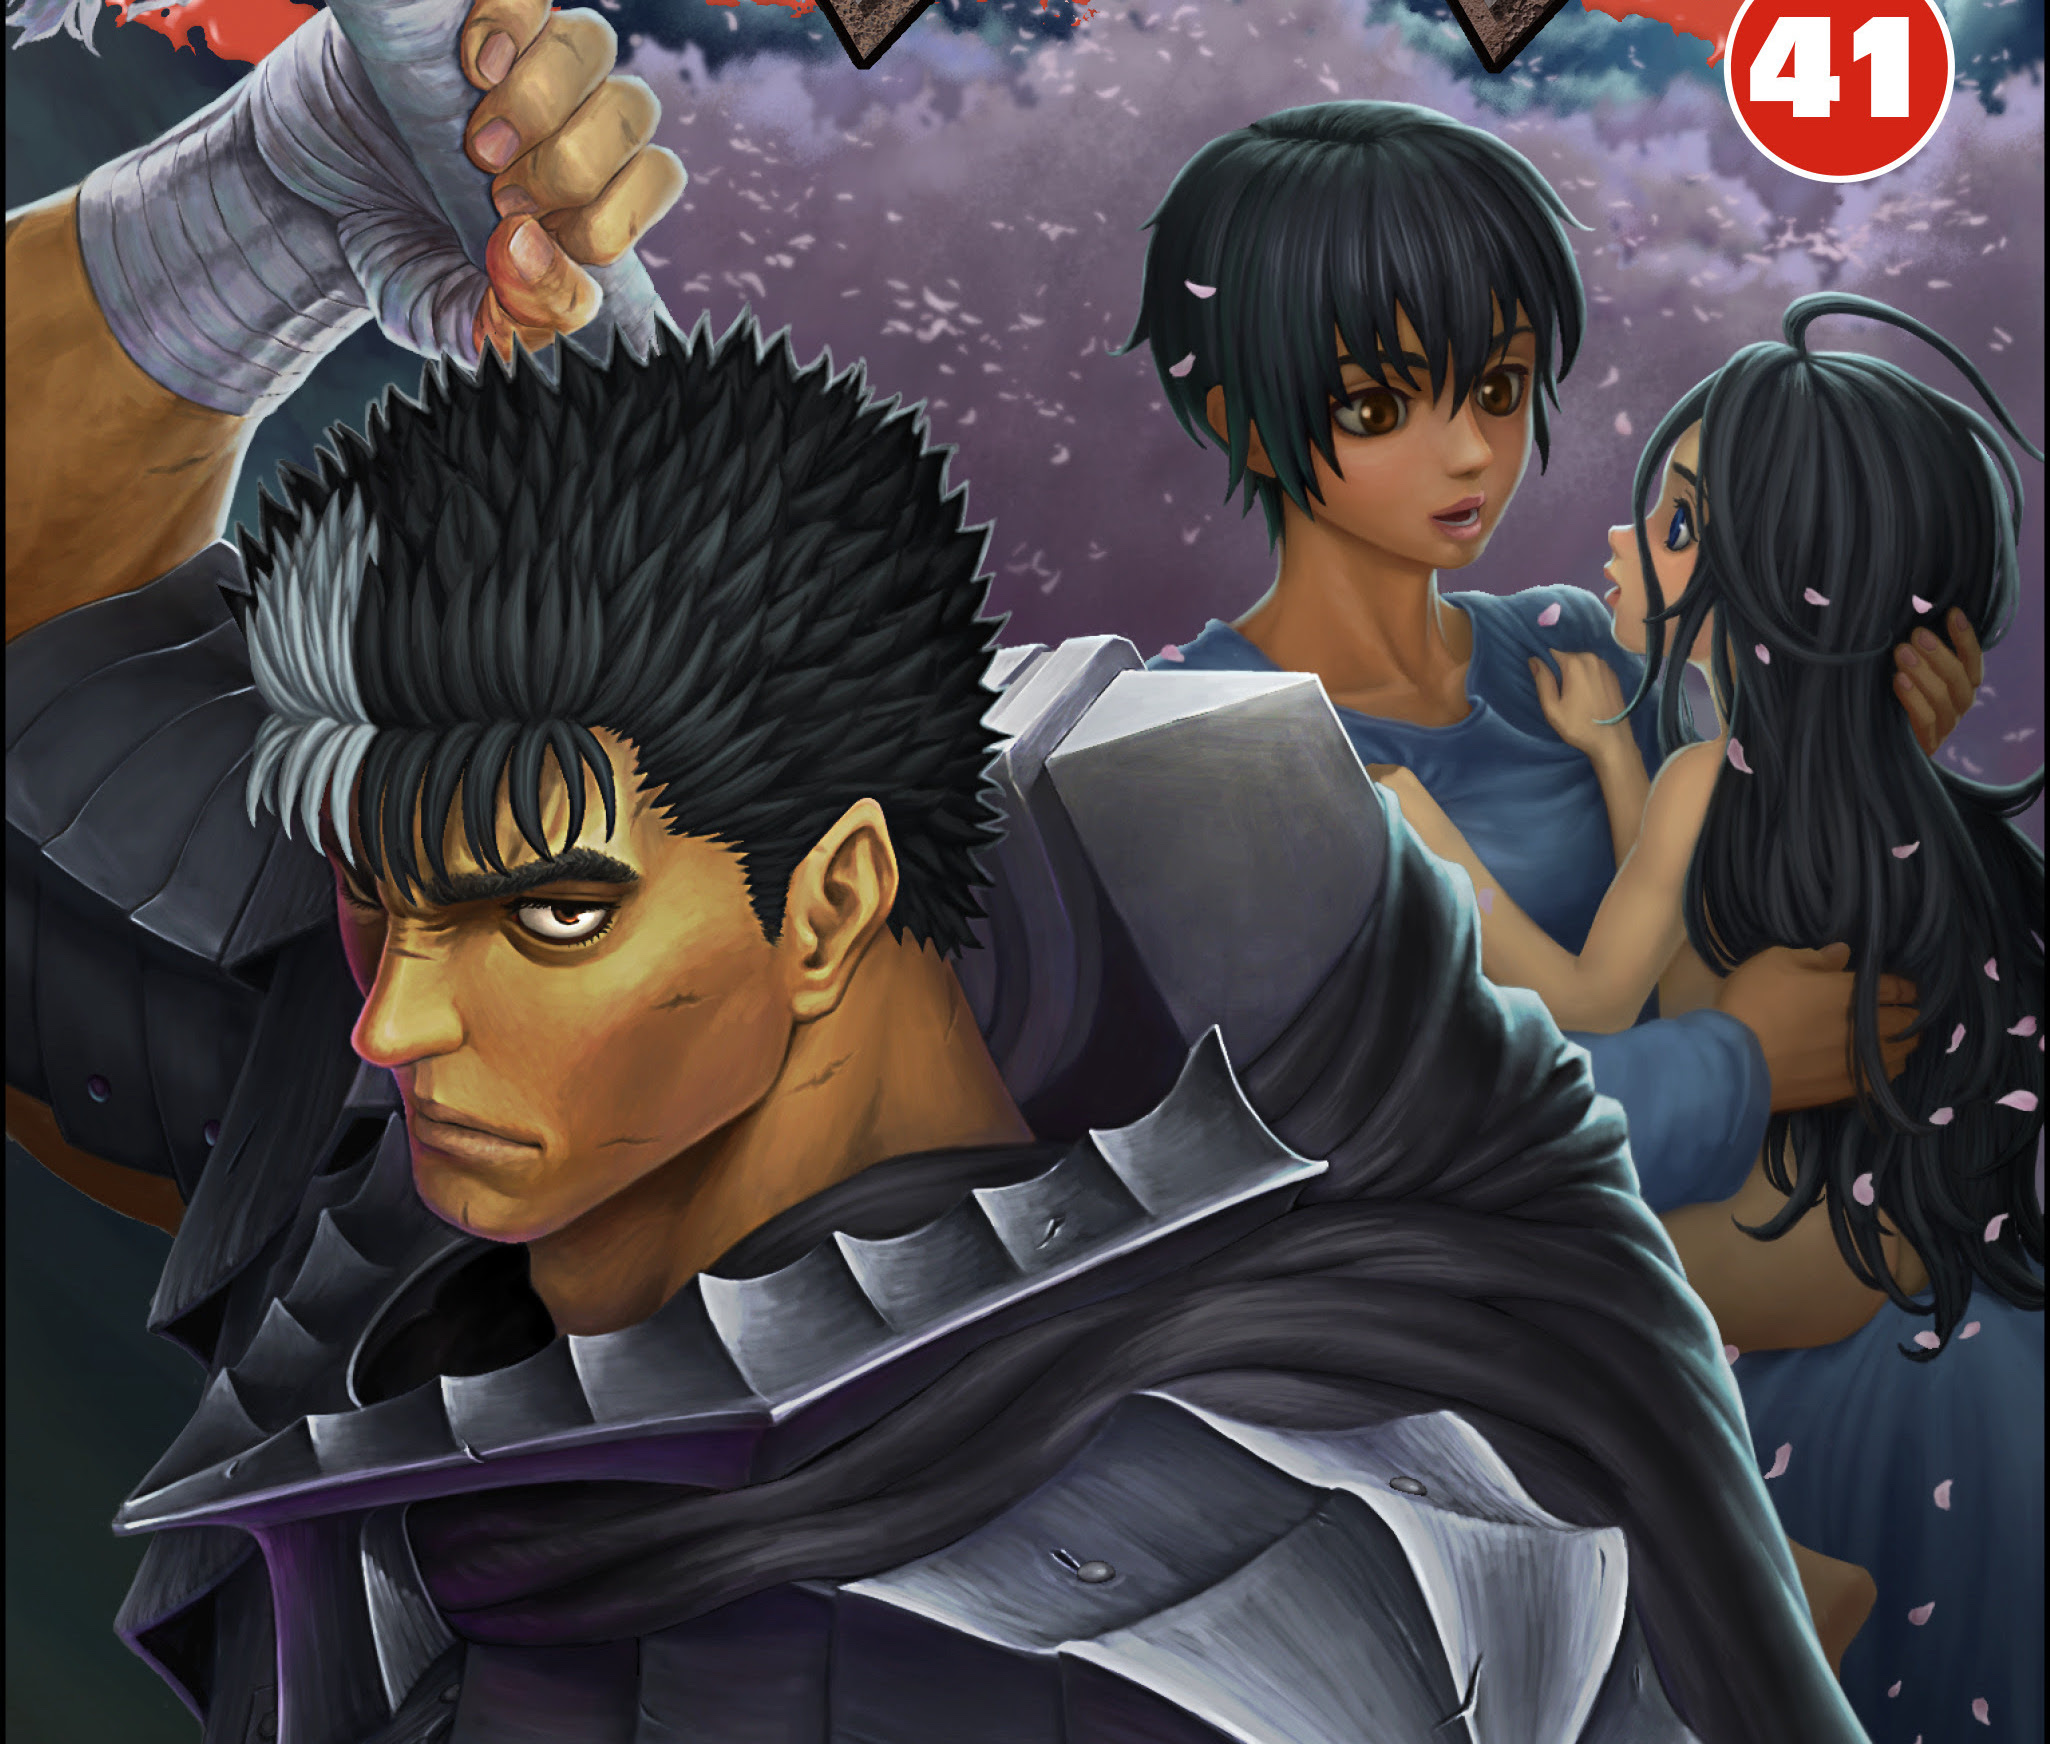 'Berserk' comes to an end with volume 41 this November